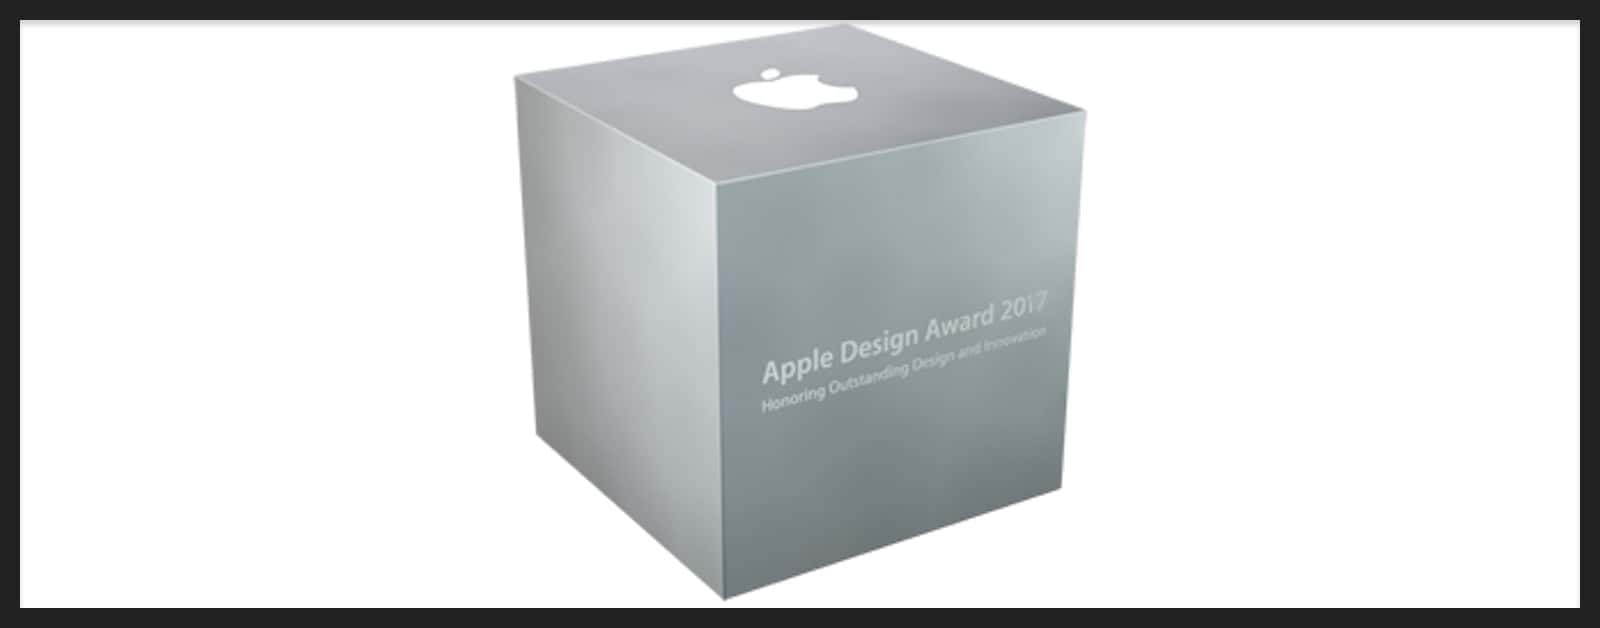 Apple Design Awards 2017 Winners Include Bear and AirMail